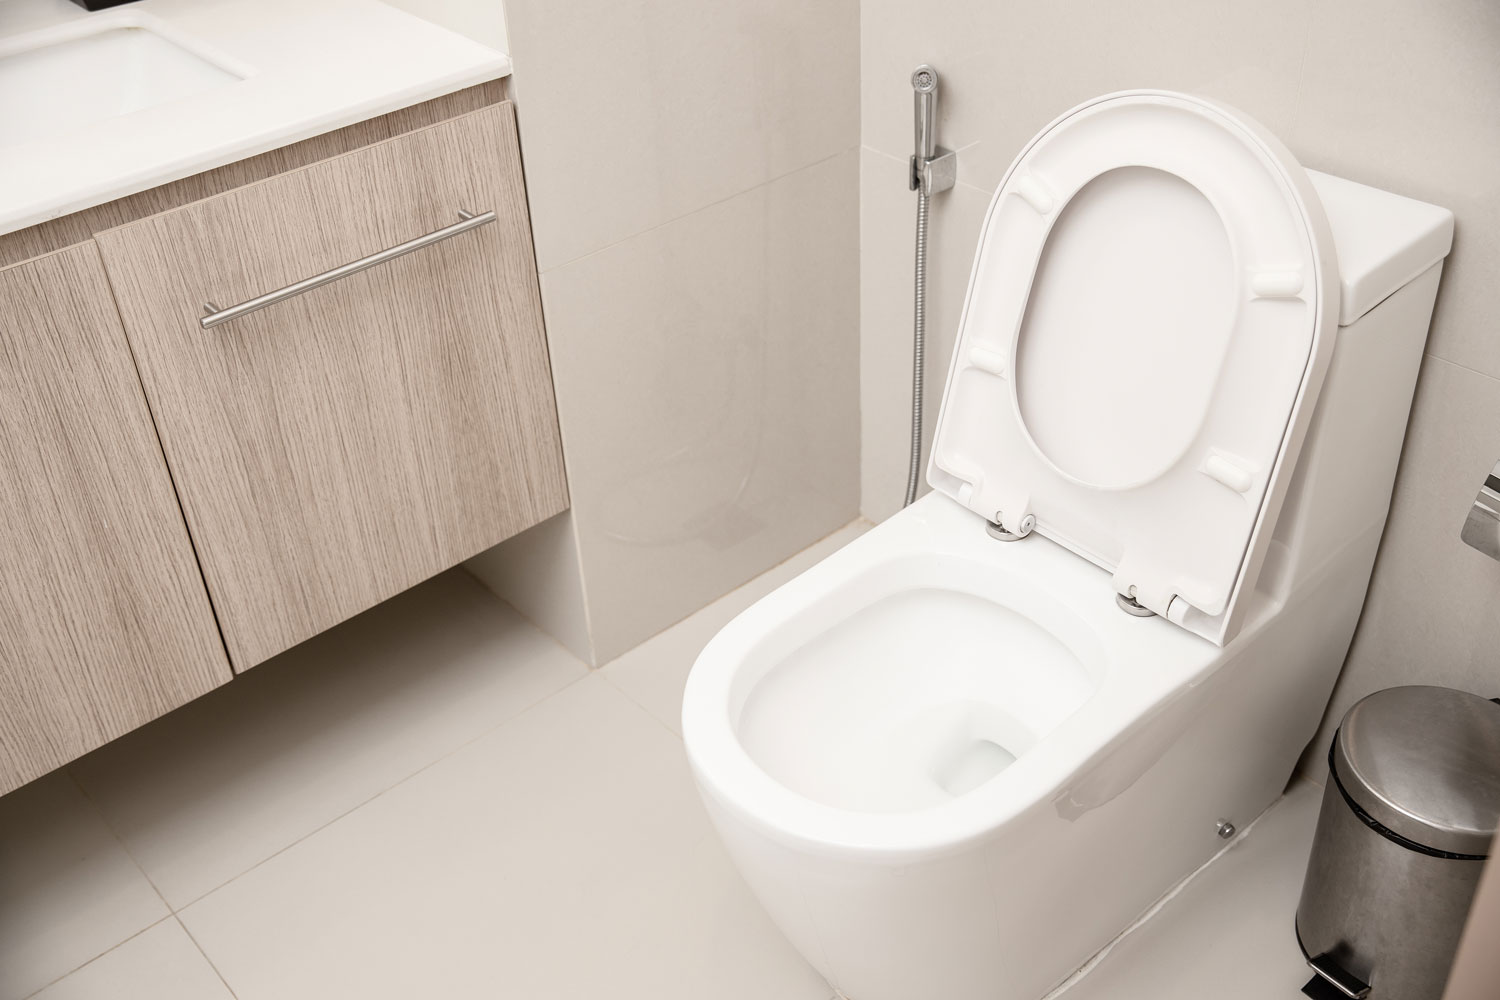 A white toilet to wall type of toilet inside a bright bathroom with a laminated cabinet vanity area